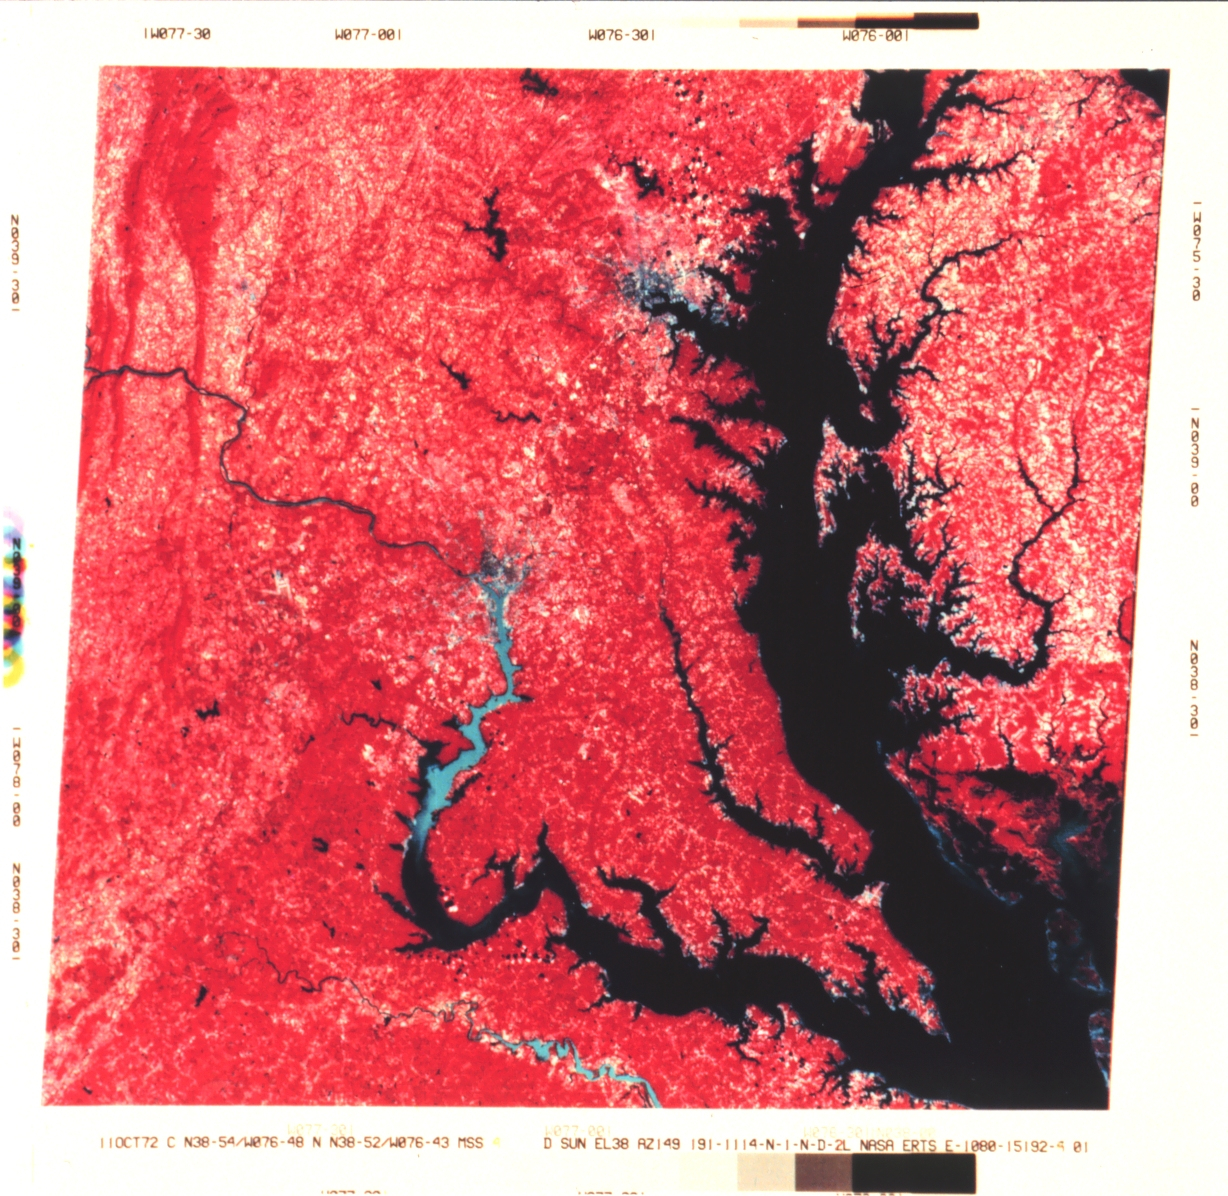 Infrared imagery as obtained by the Landsat satellite of upper Chesapeake Bay